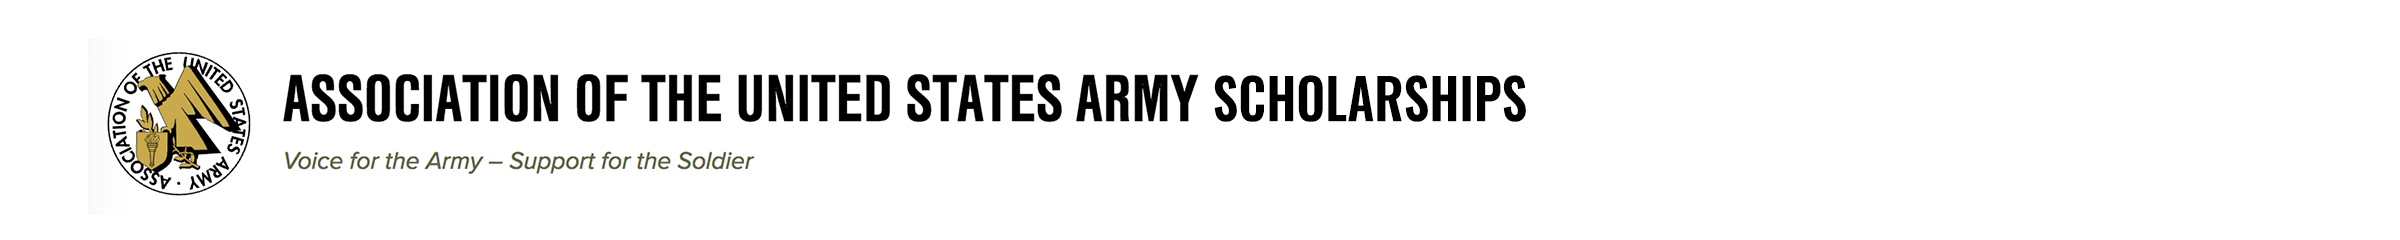 Association of the United States Army Scholarships logo